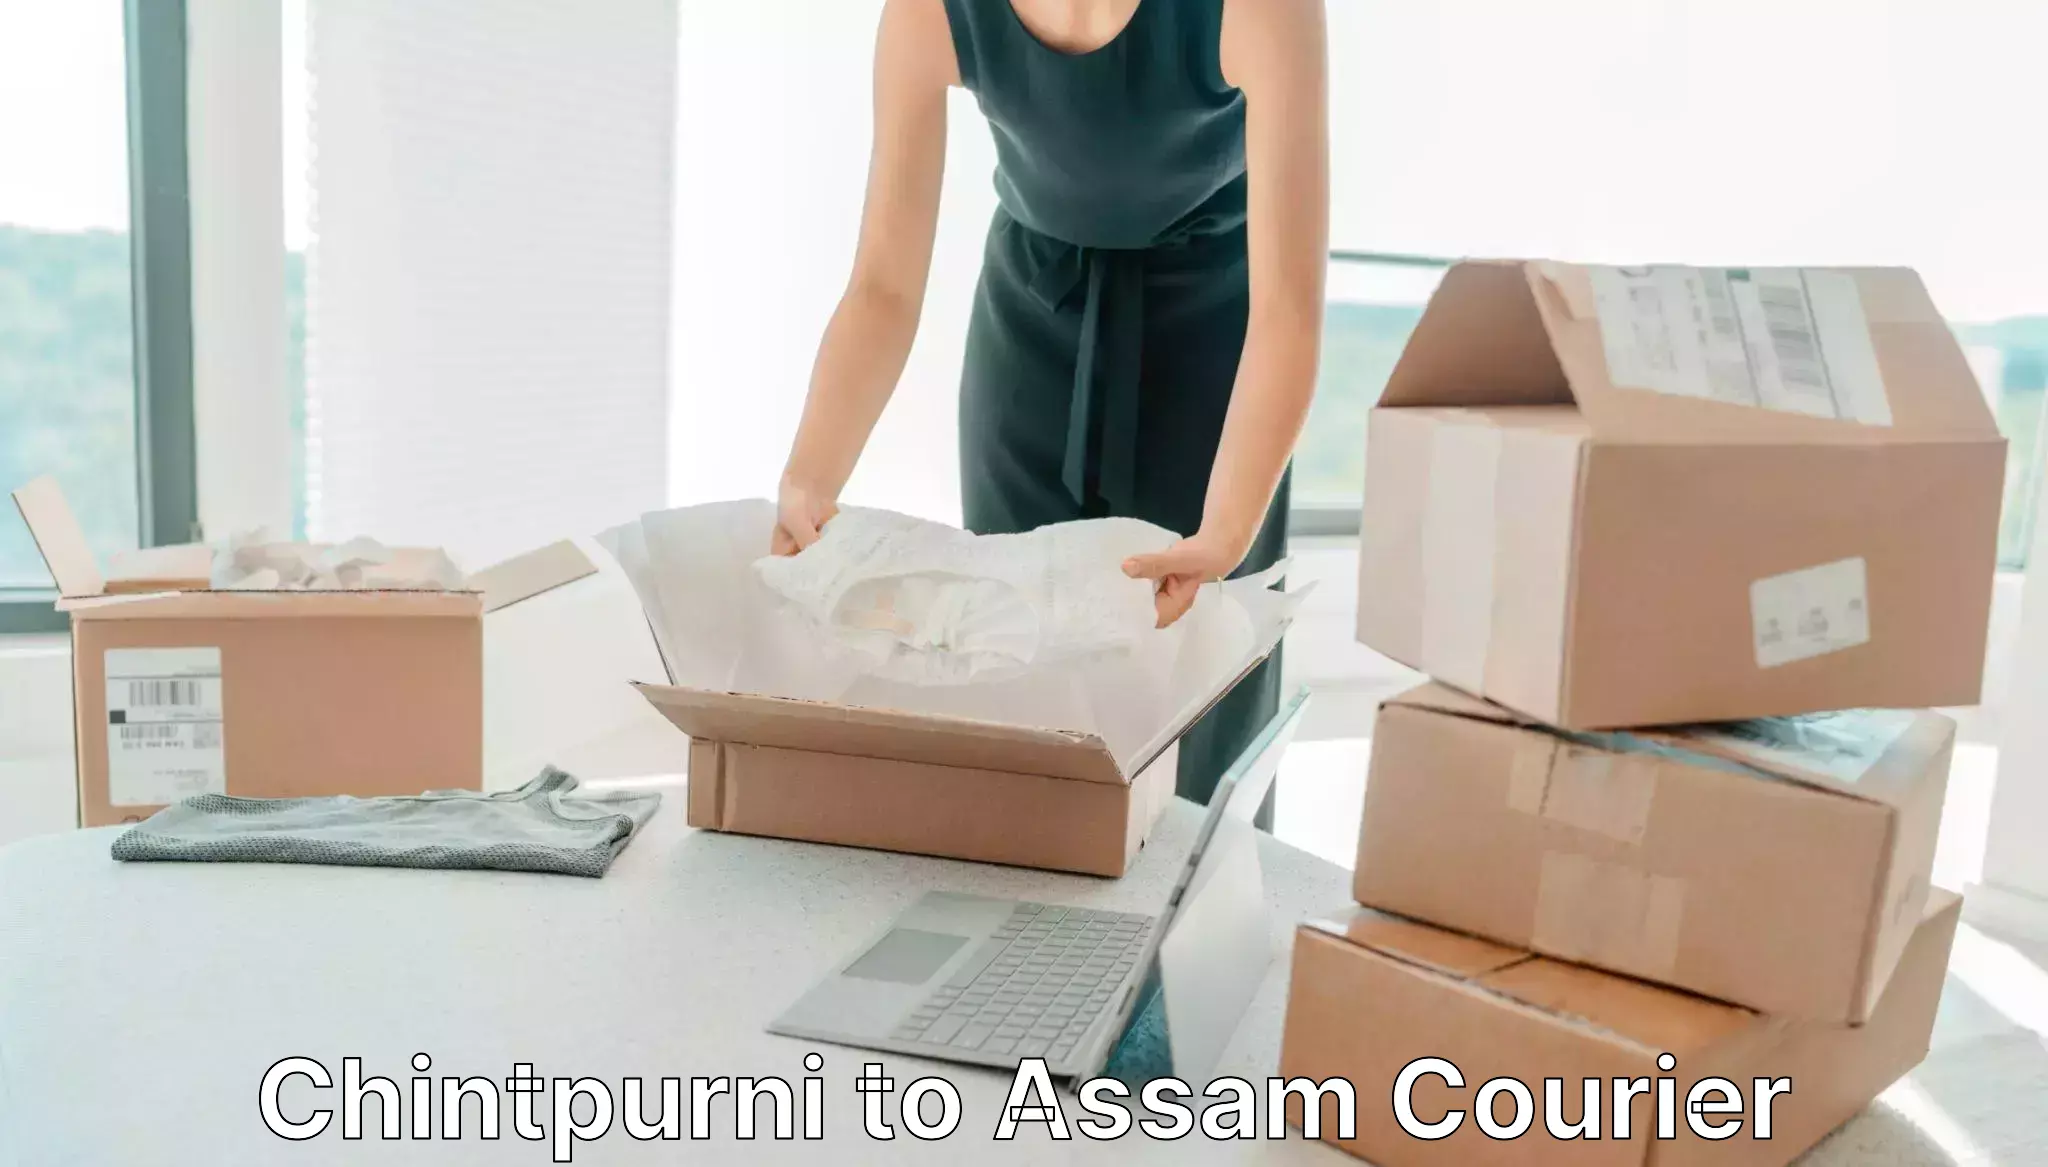 Reliable parcel services in Chintpurni to Lumding